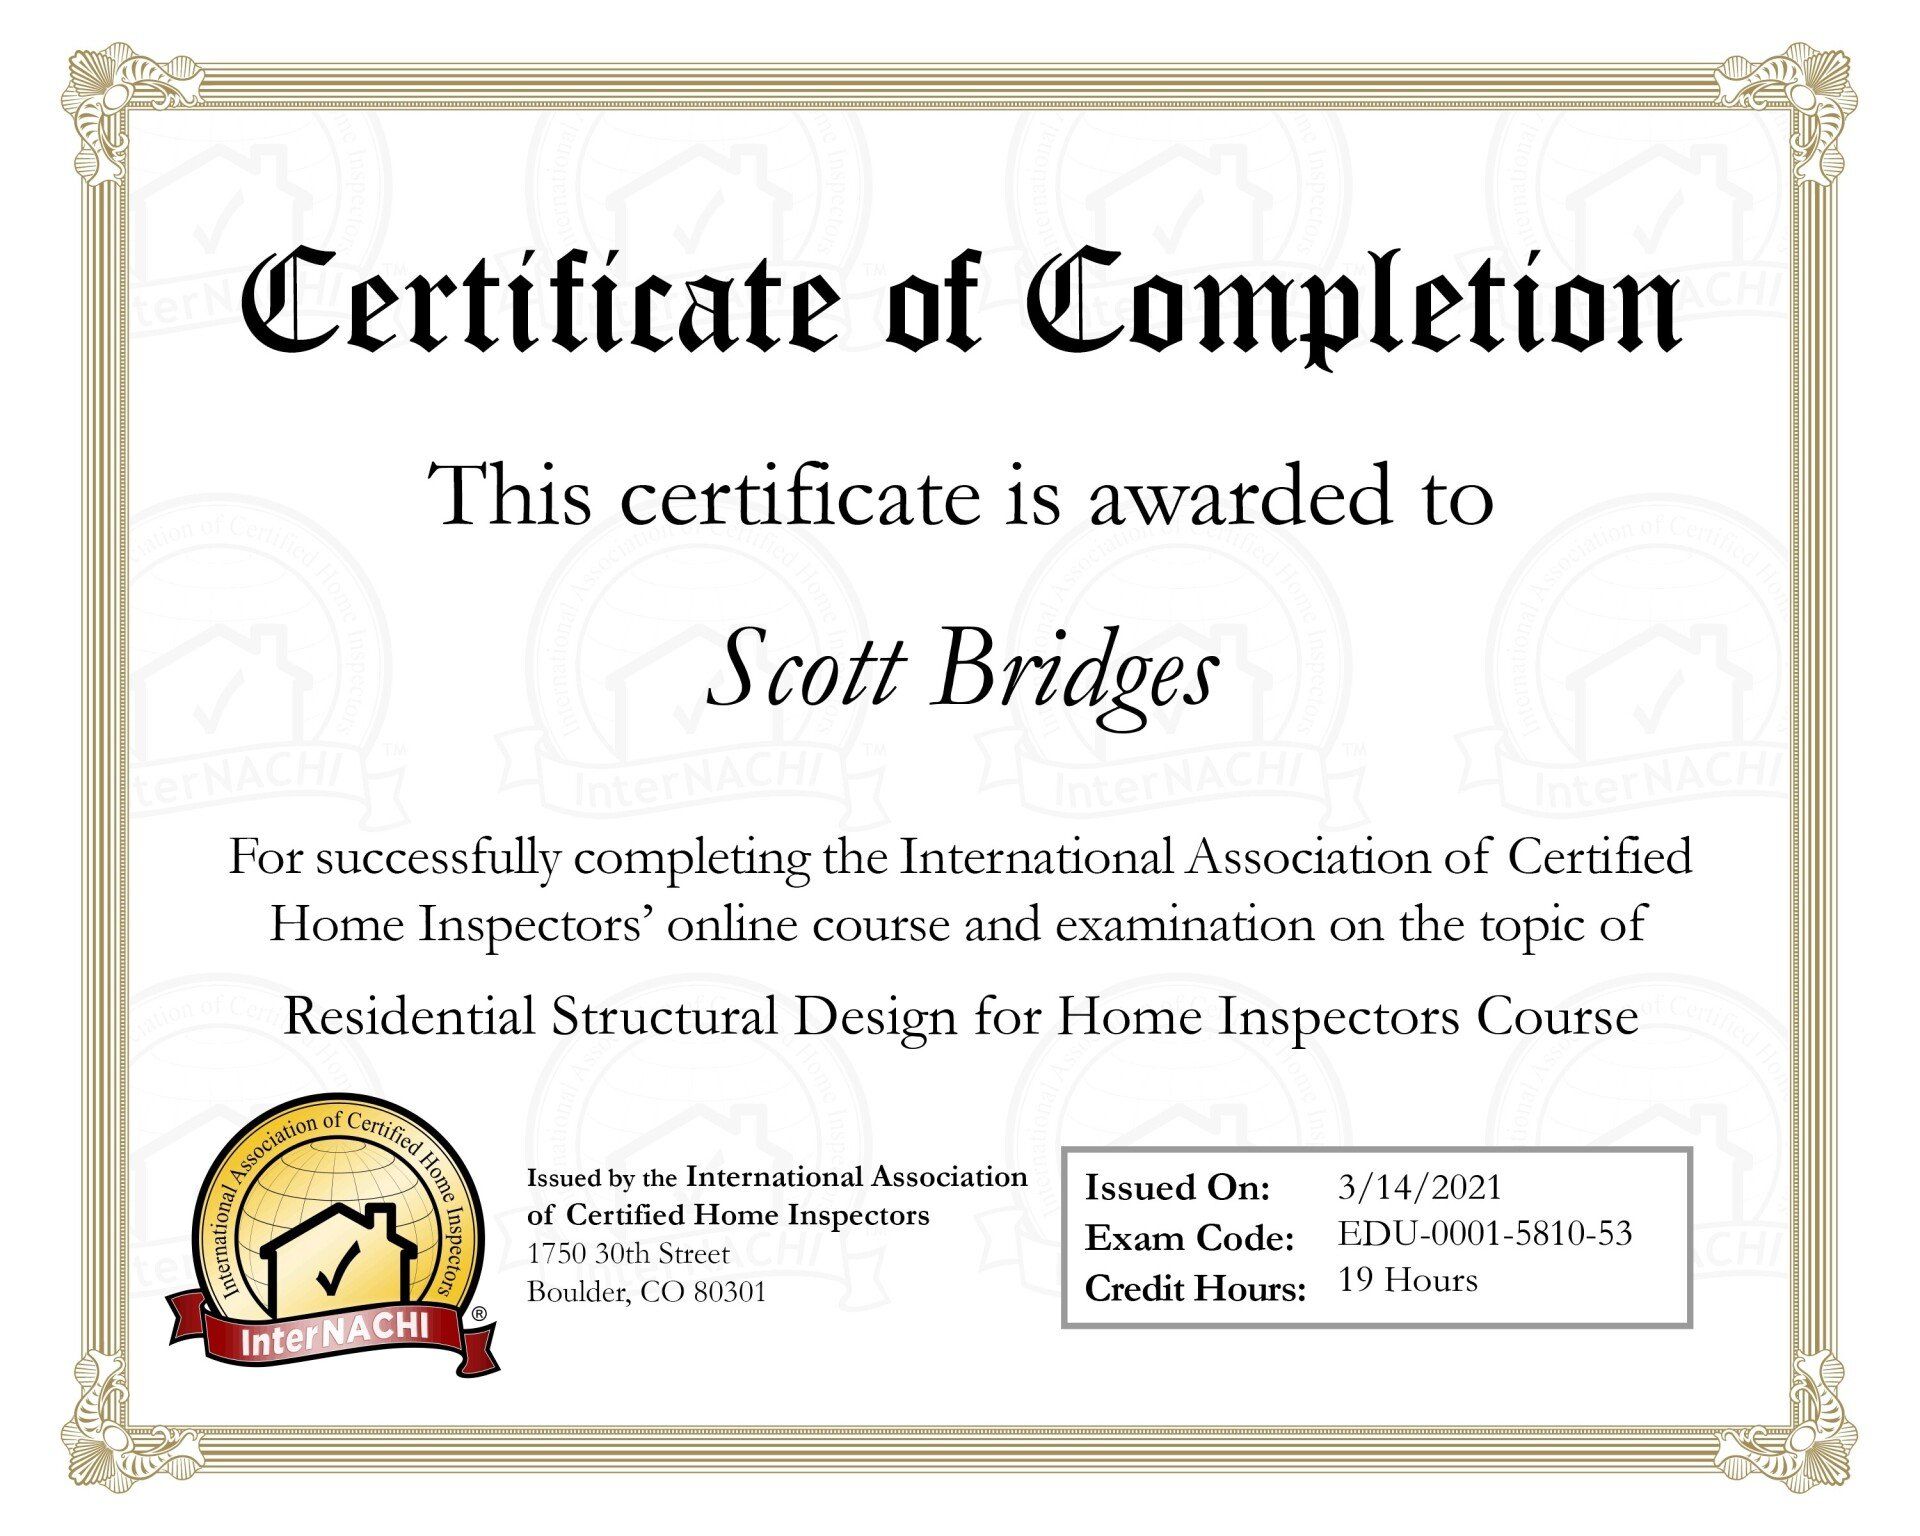 Residential Structural Design for Home Inspectors Course